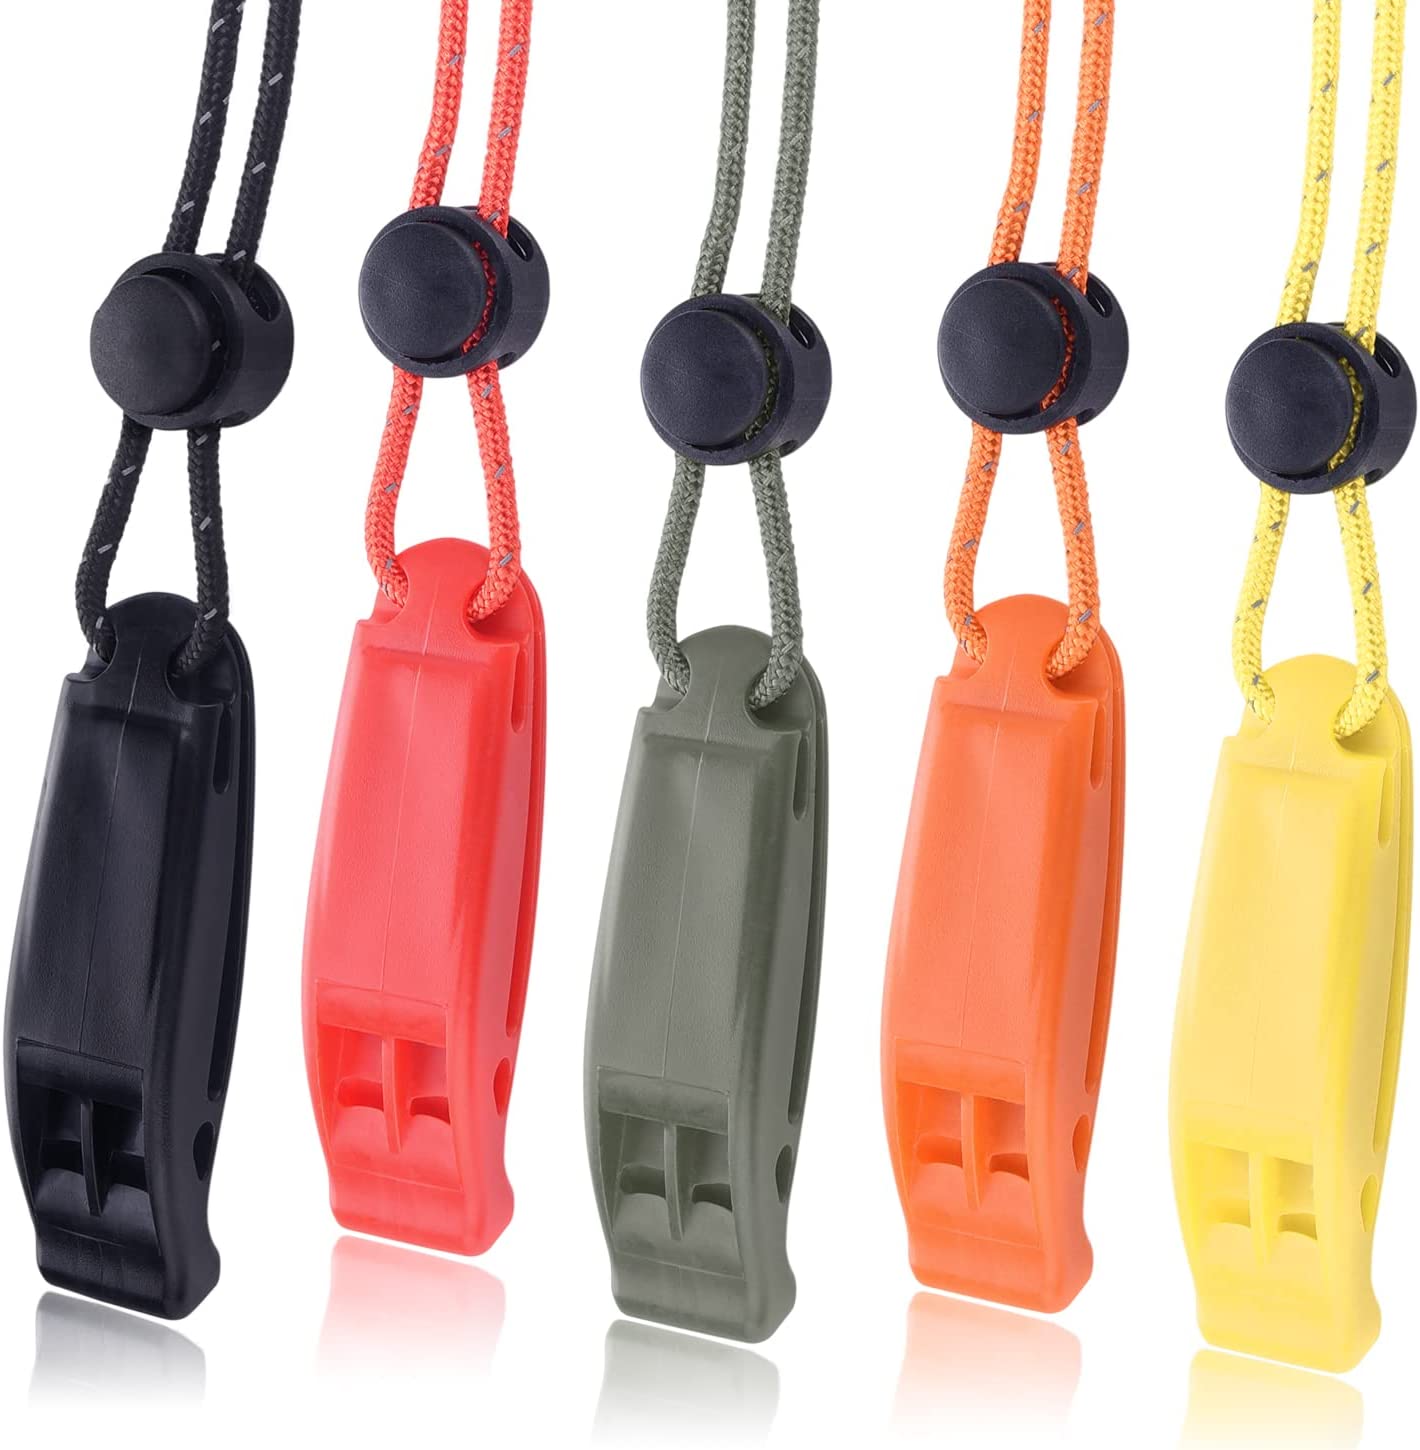 5 Pack Whistles Emergency, Shrill Loud Kayak Safety Whistle with Reflective Lanyard for Outdoor Climbing Hiking Camping Fishing Boating Boat Life Jacket Water Survival Rescue Signaling (5 Color)